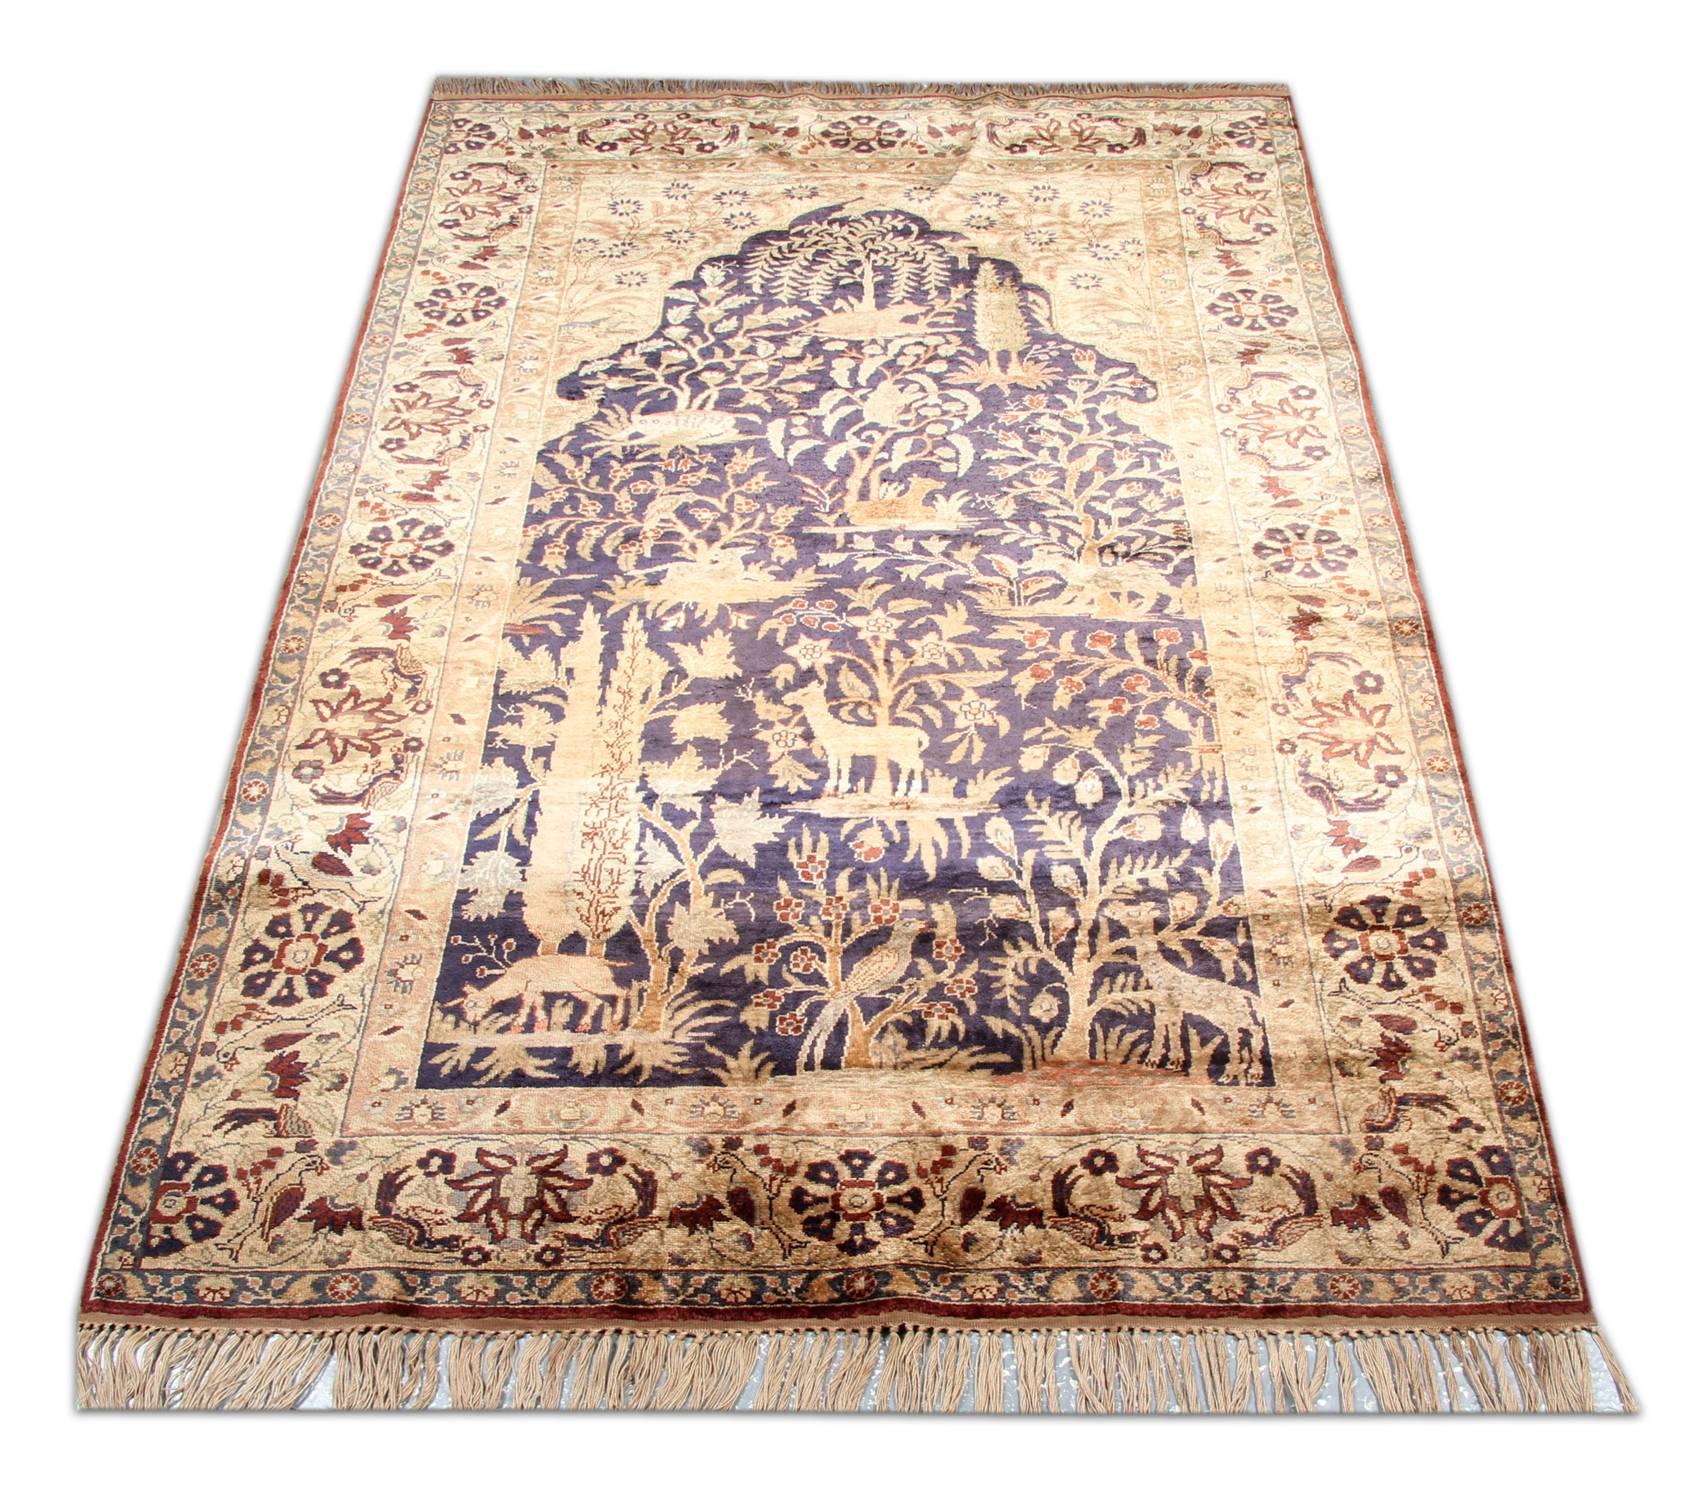 A finely hand-knotted vintage Central Anatolian golden purple rug with a Classic all-over paradise design of small patterns. The high-quality wool pile on the strong silk foundation of this gold rug and its excellent original condition let this